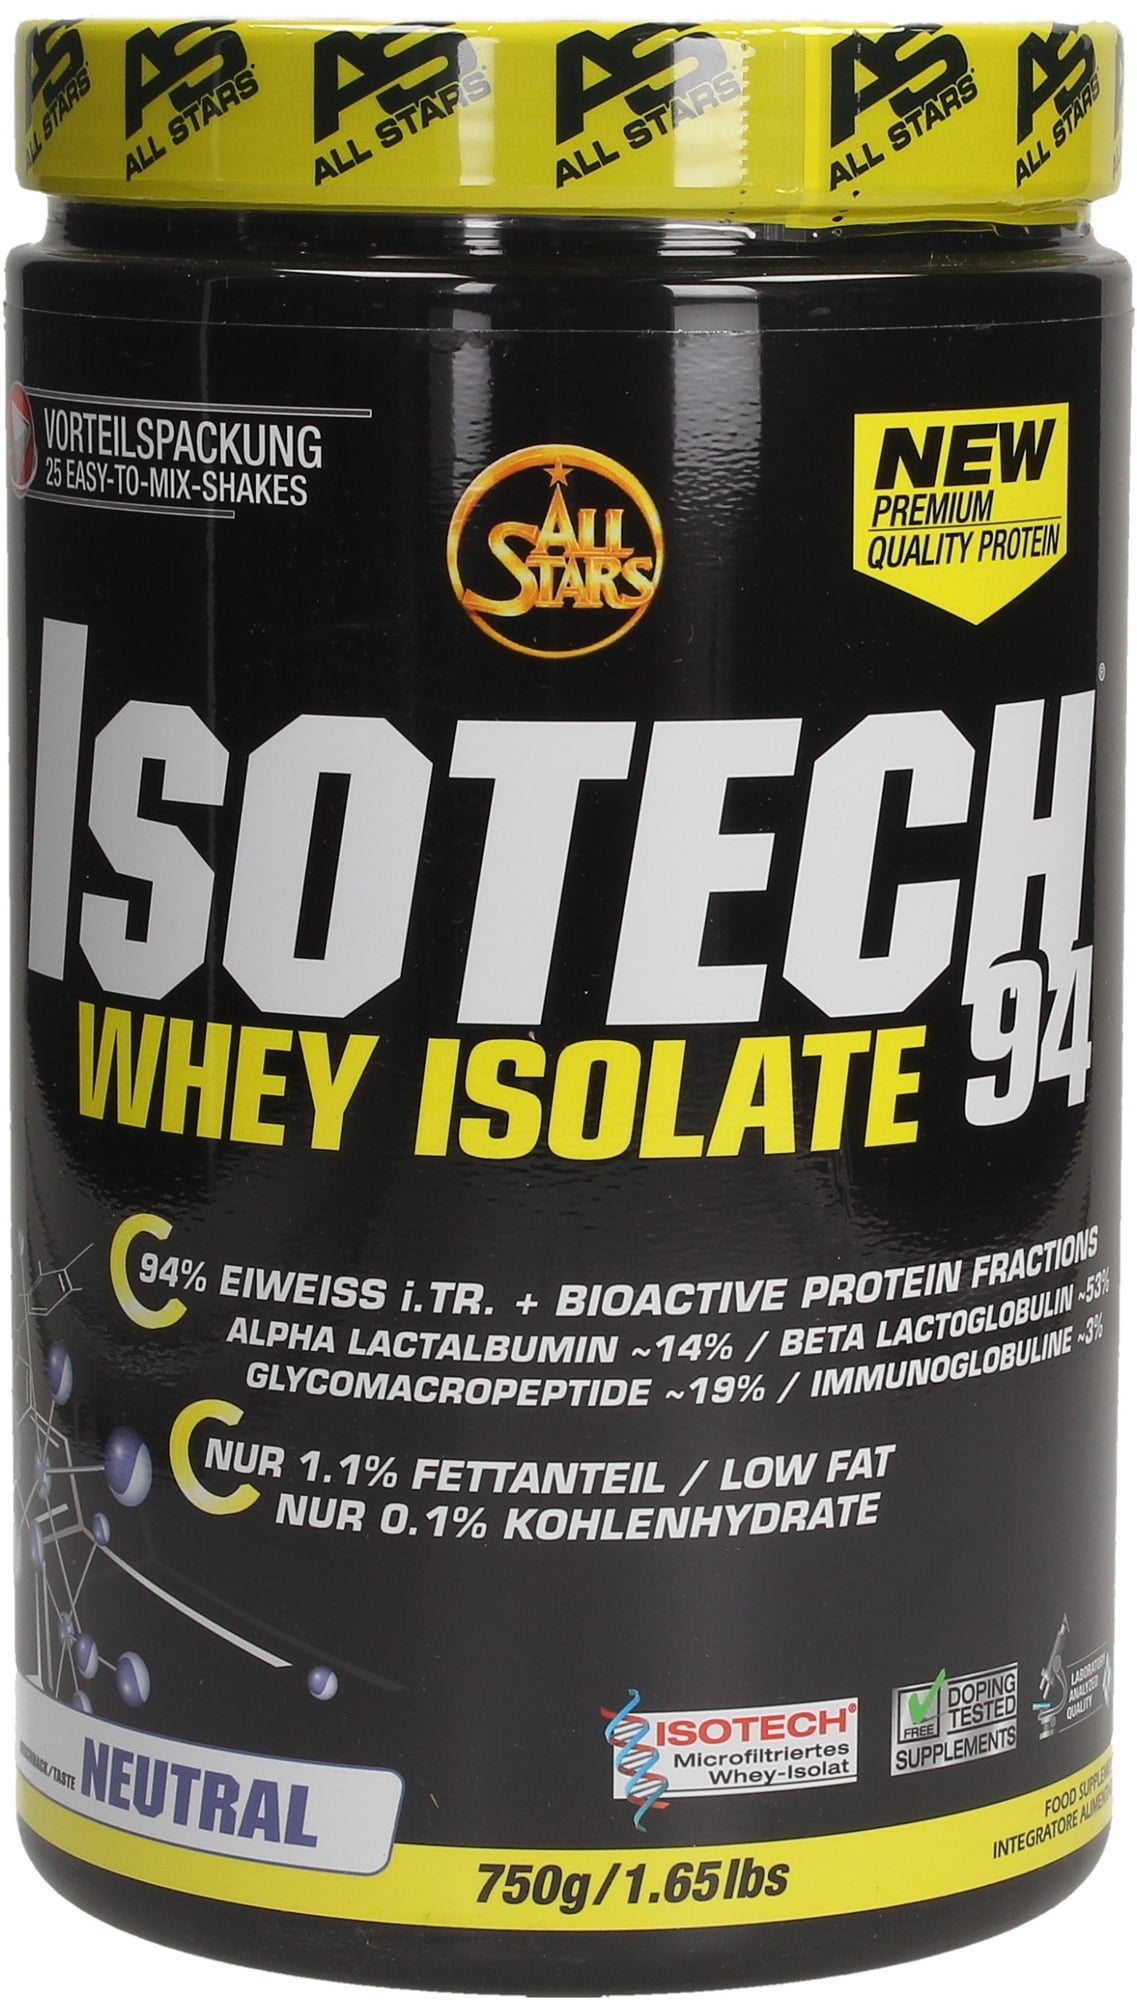 All Stars Isotech Whey 94 - Neutral